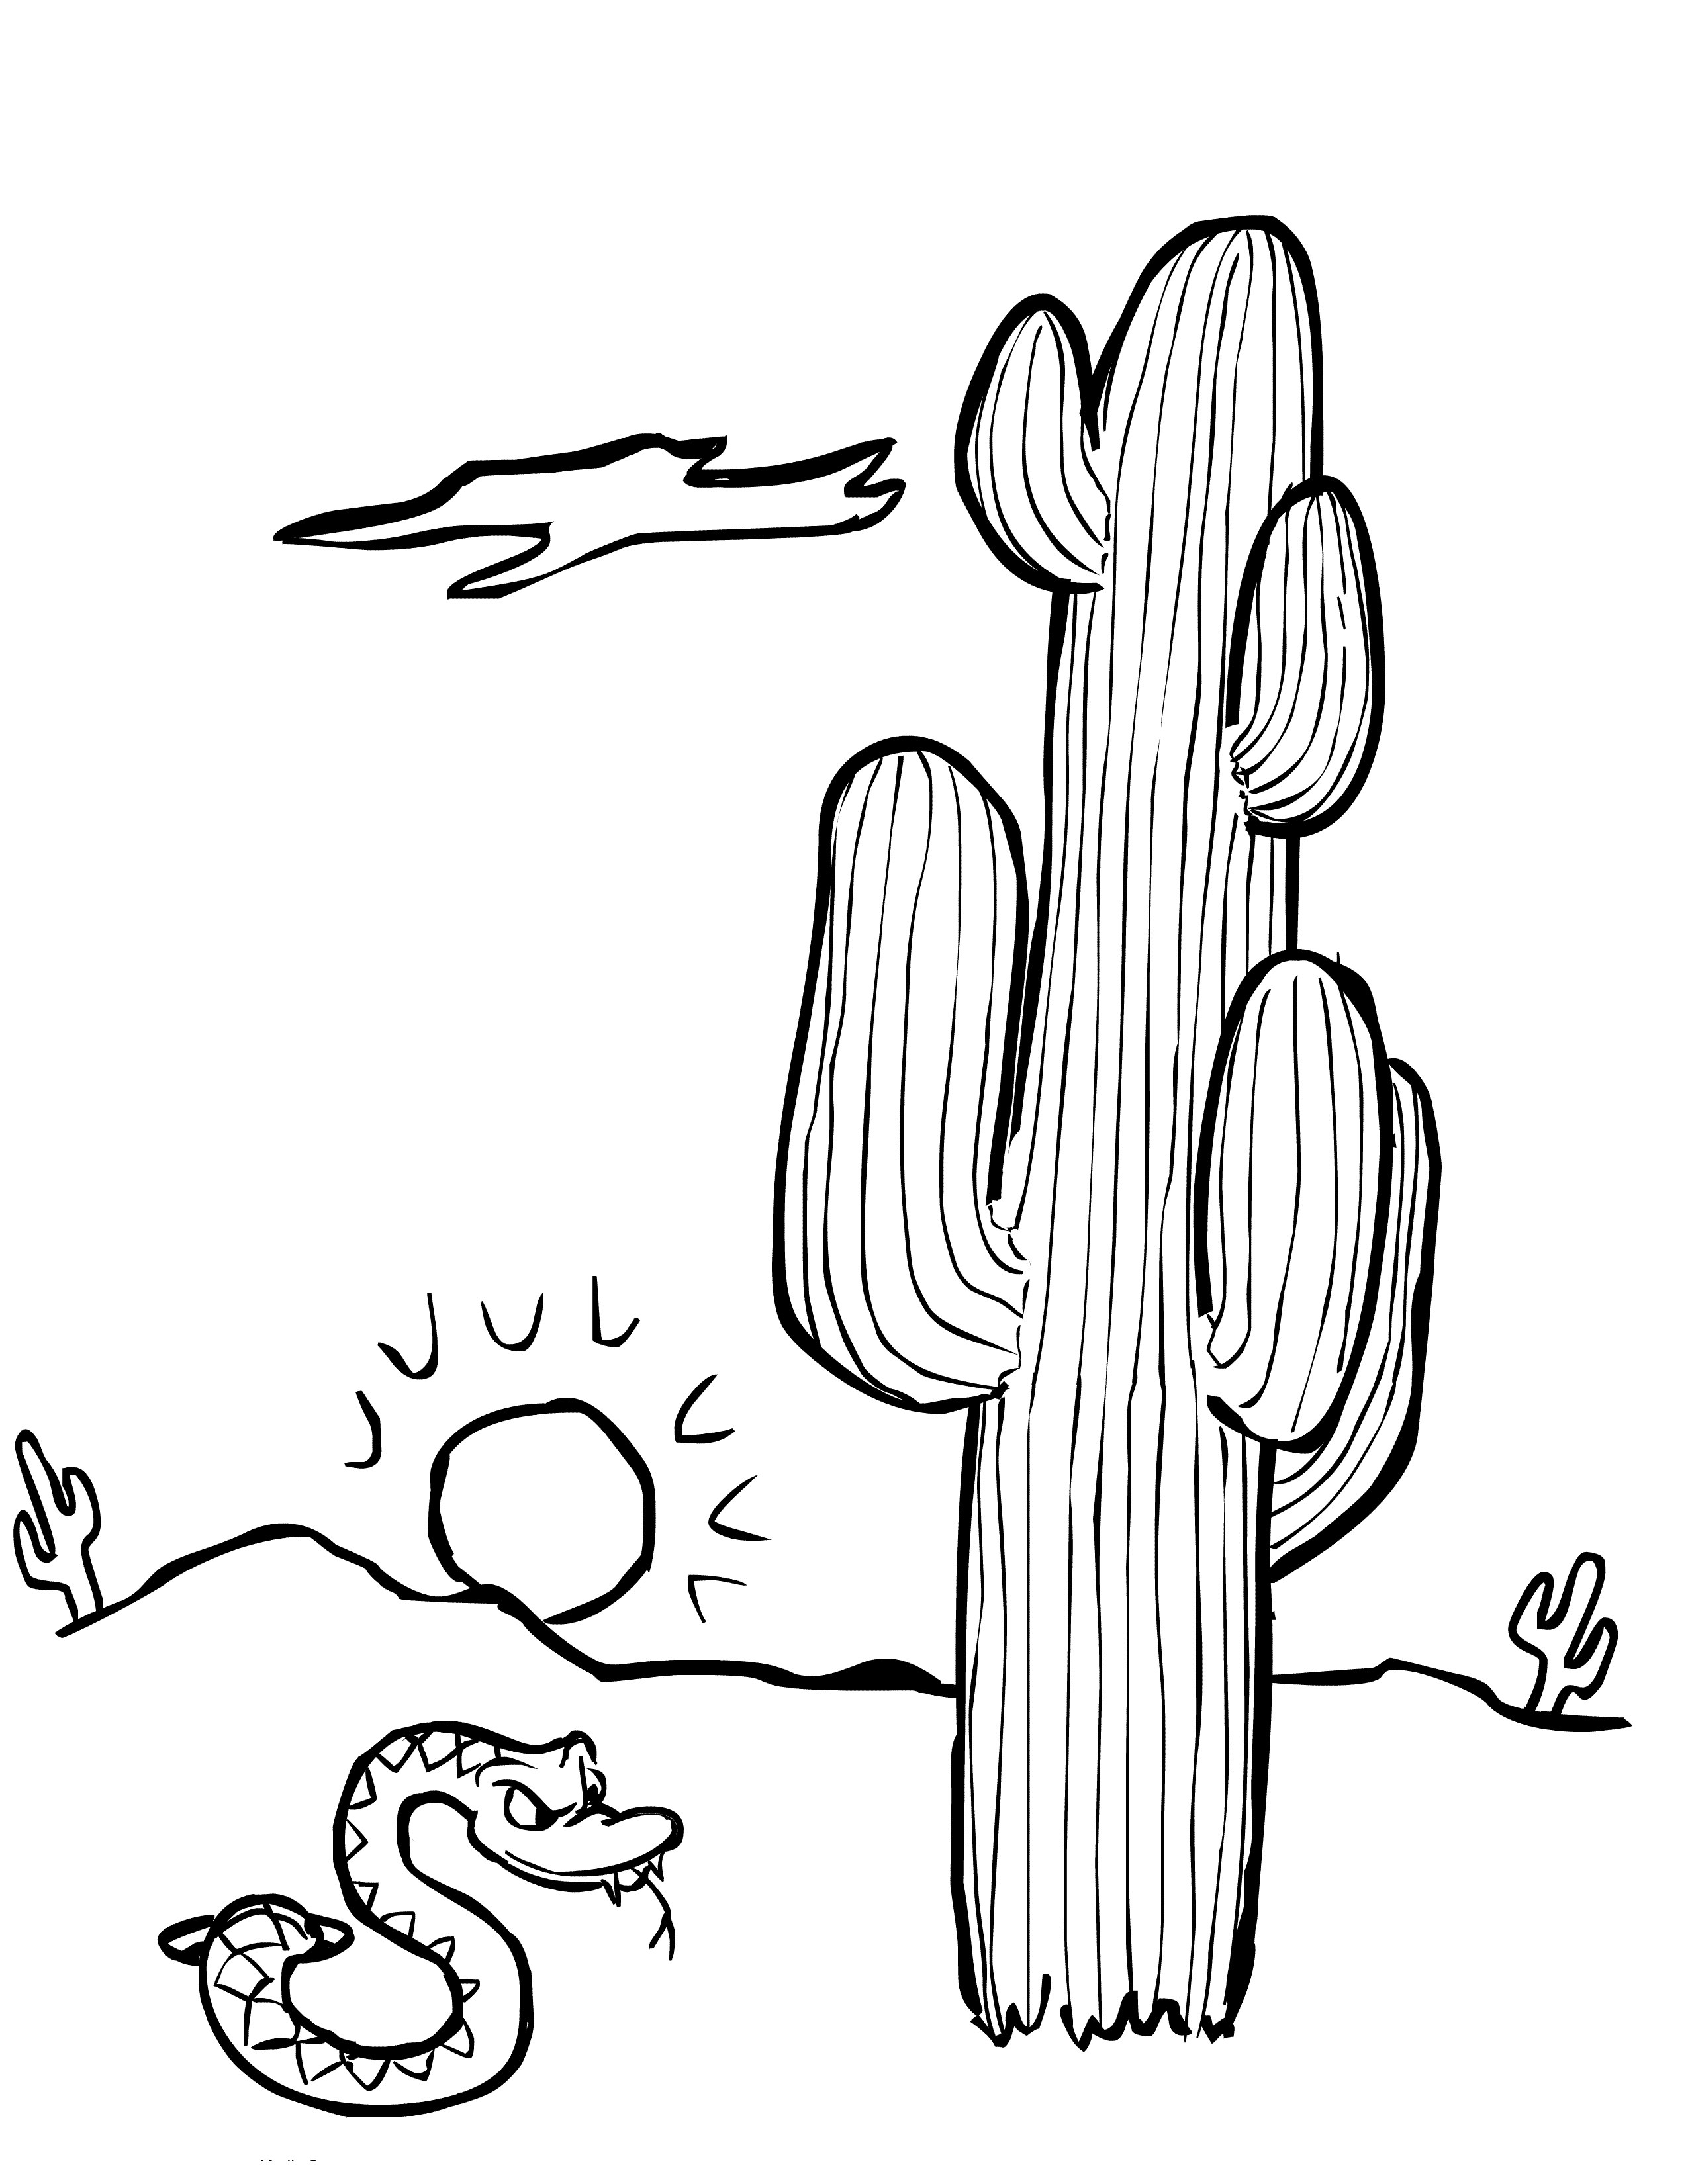 free coloring pages of the desert